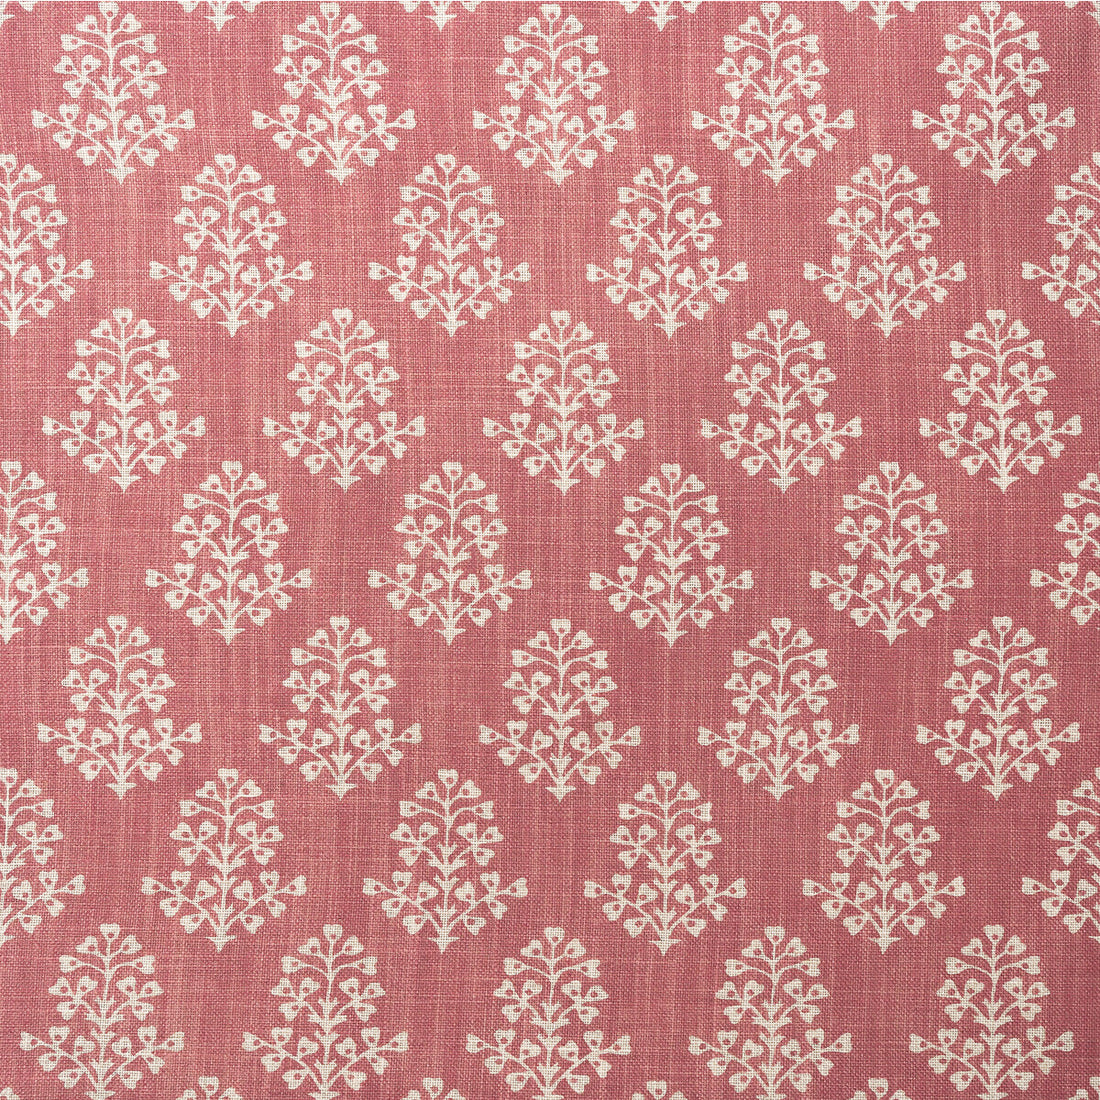 Sprig fabric in pink color - pattern AM100384.77.0 - by Kravet Couture in the Andrew Martin Garden Path collection